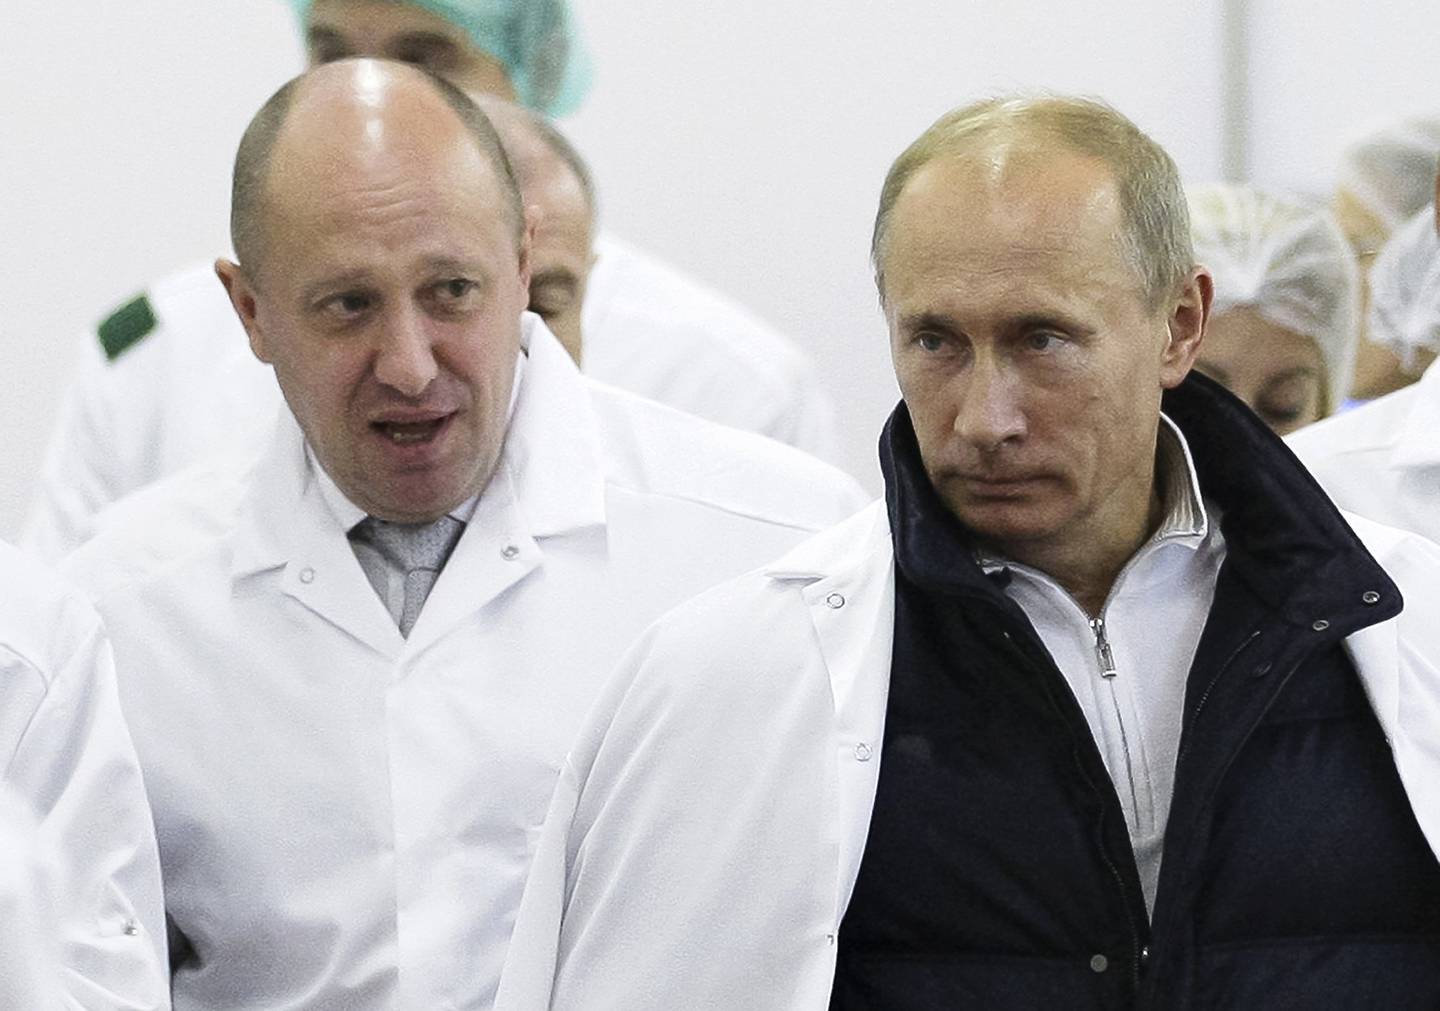 FILE - In this Monday, Sept. 20, 2010 file photo, businessman Yevgeny Prigozhin, left, shows Russian President Vladimir Putin, around his factory which produces school means, outside St. Petersburg, Russia. One of those indicted in the Russia probe is a businessman with ties to Russian President Vladimir Putin. Prigozhin is an entrepreneur from St. Petersburg who's been dubbed "Putin's chef" by Russian media. His restaurants and catering businesses have hosted the Kremlin leader's dinners with foreign dignitaries. (Alexei Druzhinin, Sputnik, Kremlin Pool Photo via AP, File)